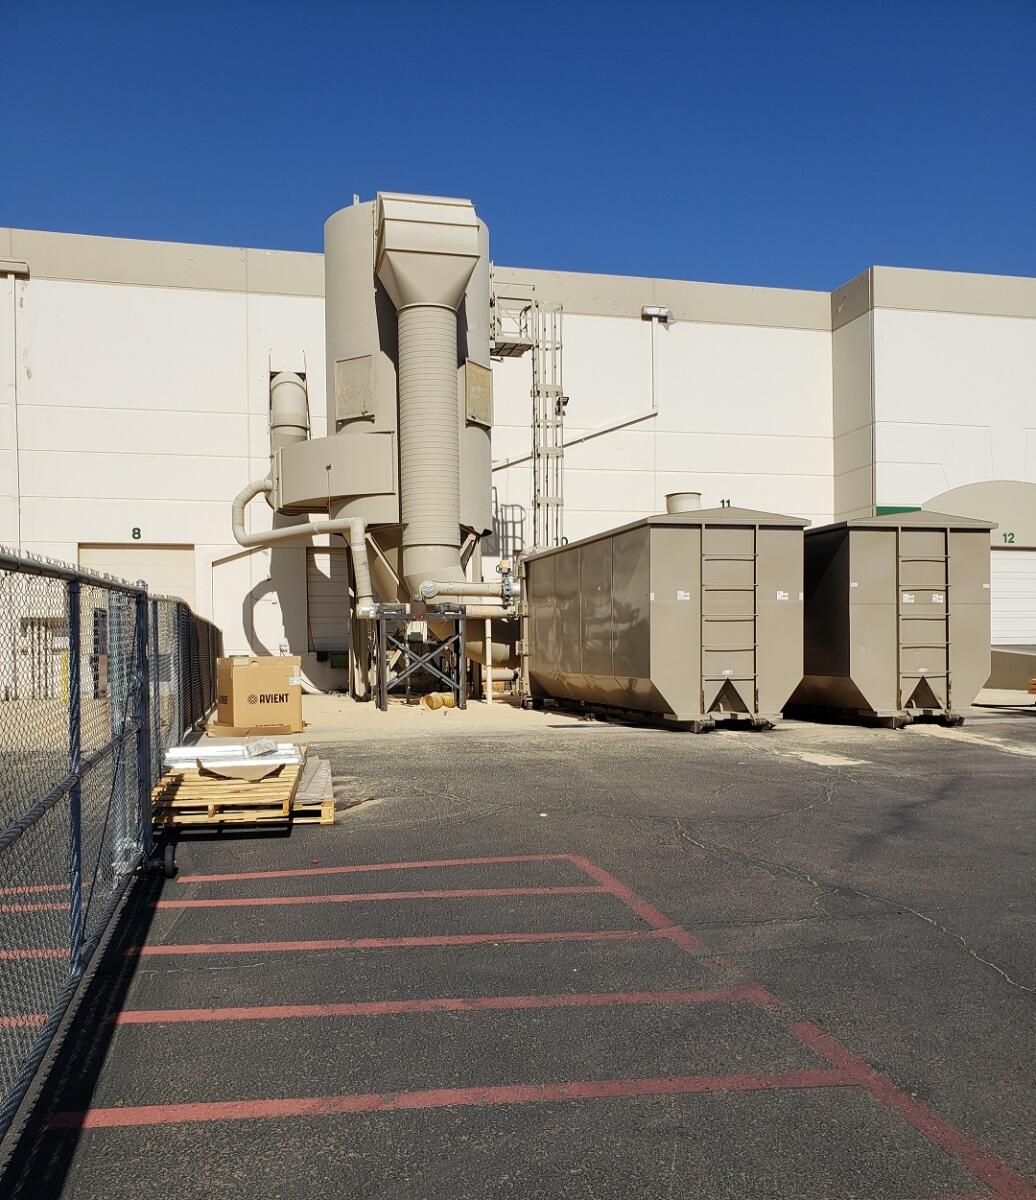 Additional image #2 for 50,000 CFM Donaldson Torit #484RFW8 Baghouse Dust Collector